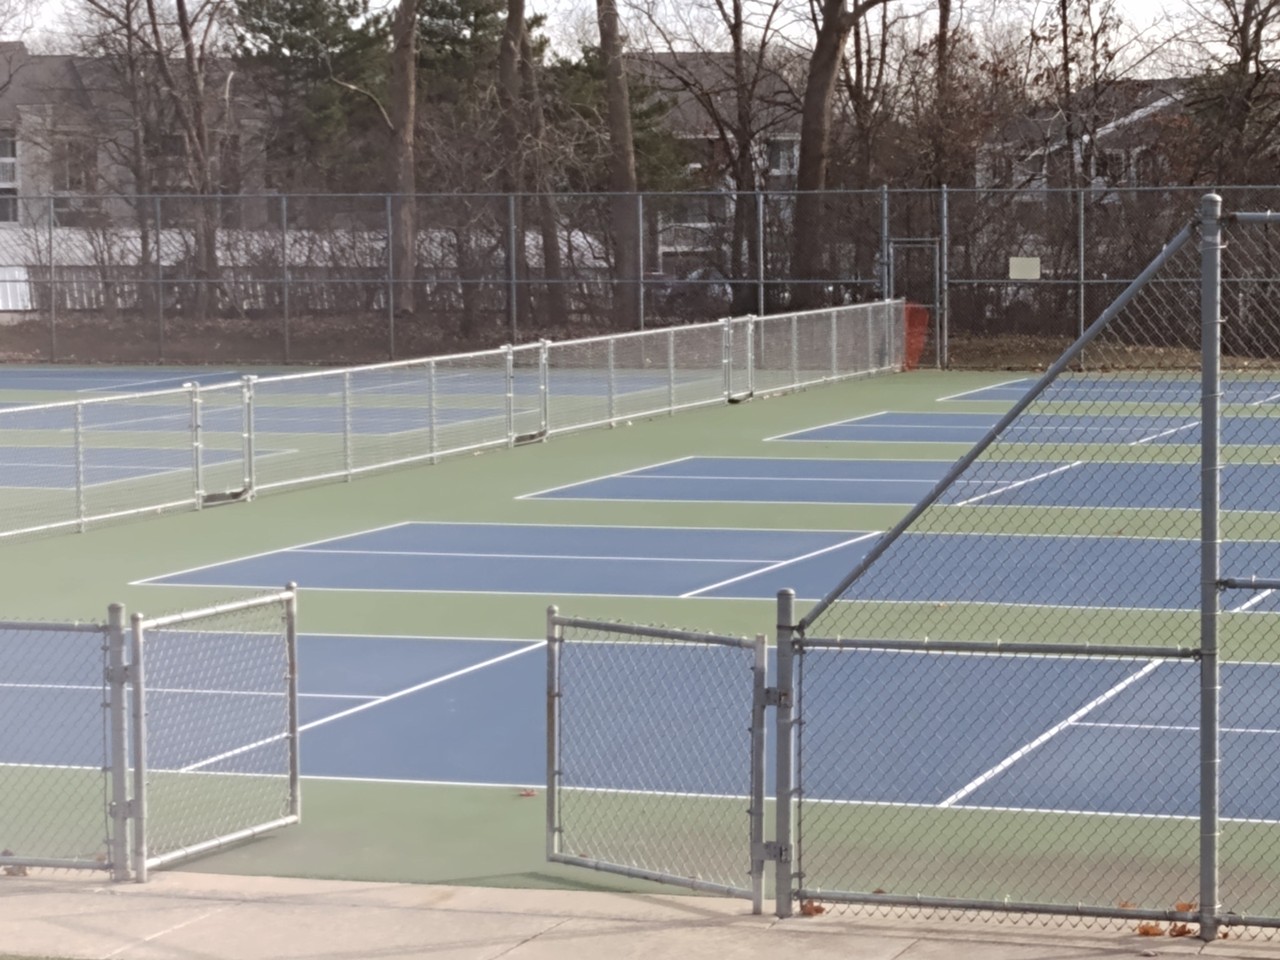 The Hawk
29995 W. 12 Mile Rd., Farmington Hills; fhgov.com; 248-699-6700
With 10 outdoor courts, you’ll be hard-pressed to find a better spot in Oakland County for pickleball. The Farmington Hills Community Center also offers indoor pickleball from 9 to noon on weekdays.